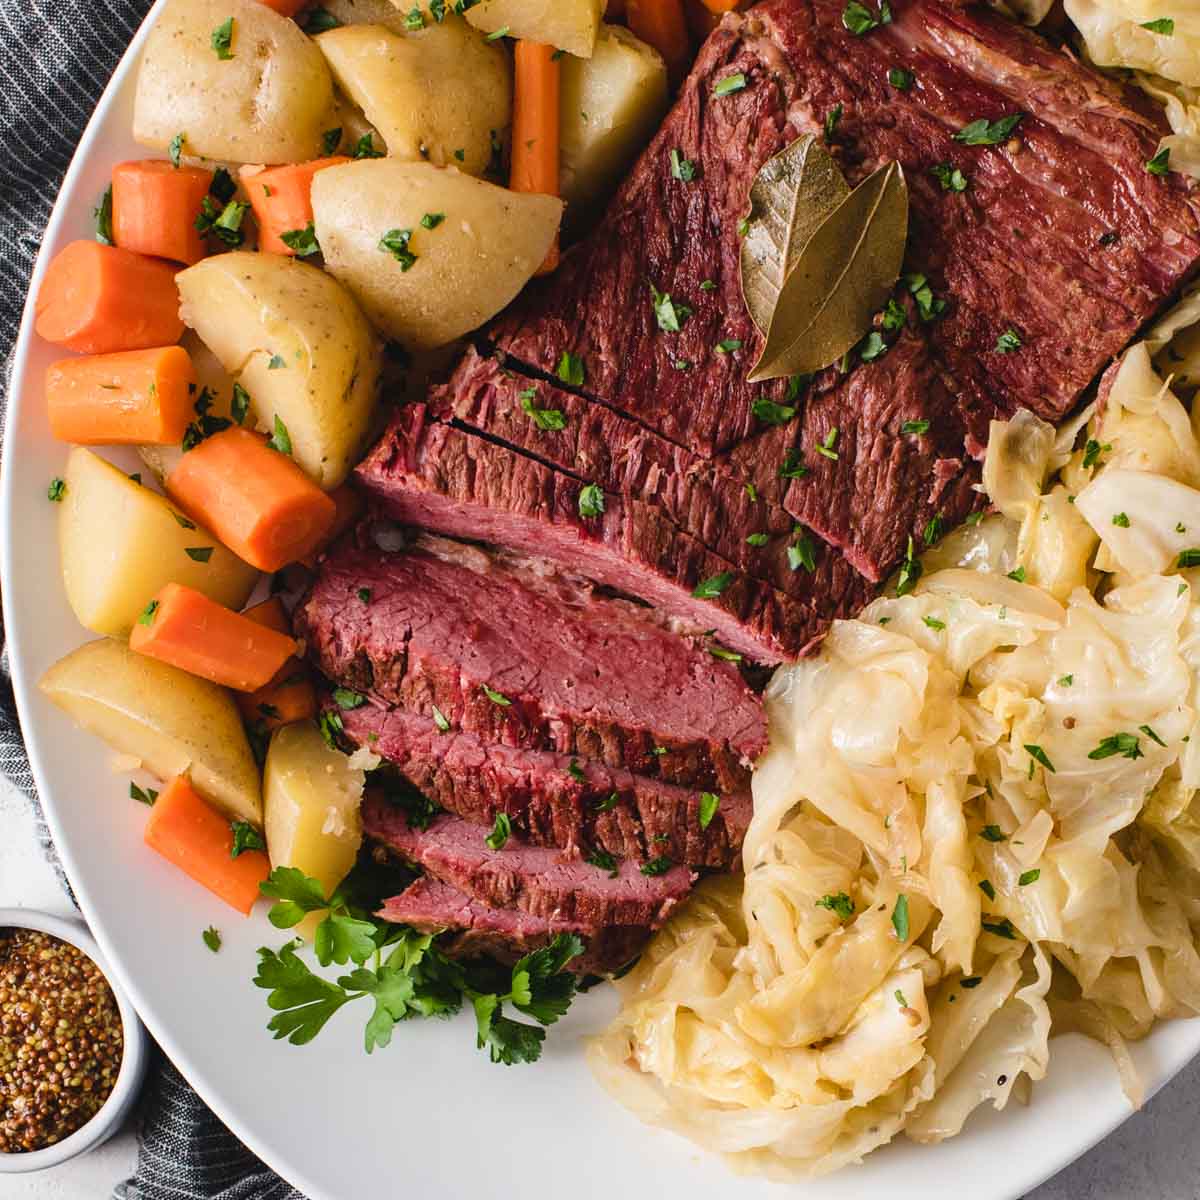 Dutch Oven Corned Beef and Cabbage - Feasting not Fasting